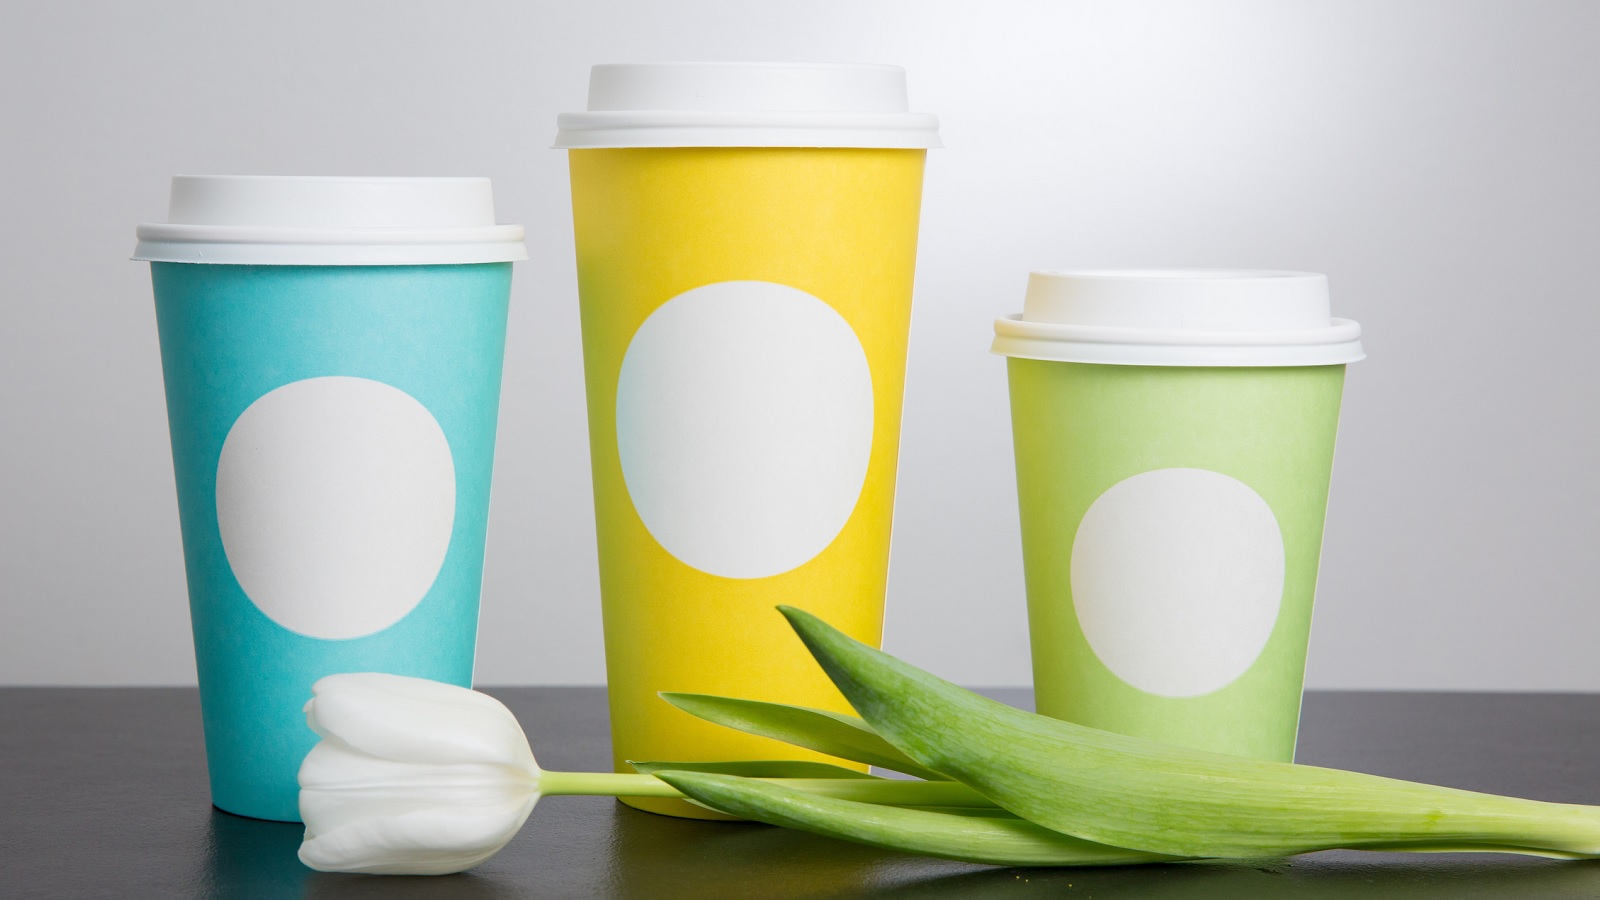 Starbucks Greets the First Days of Spring with Open Arms and Brightly Colored Cups